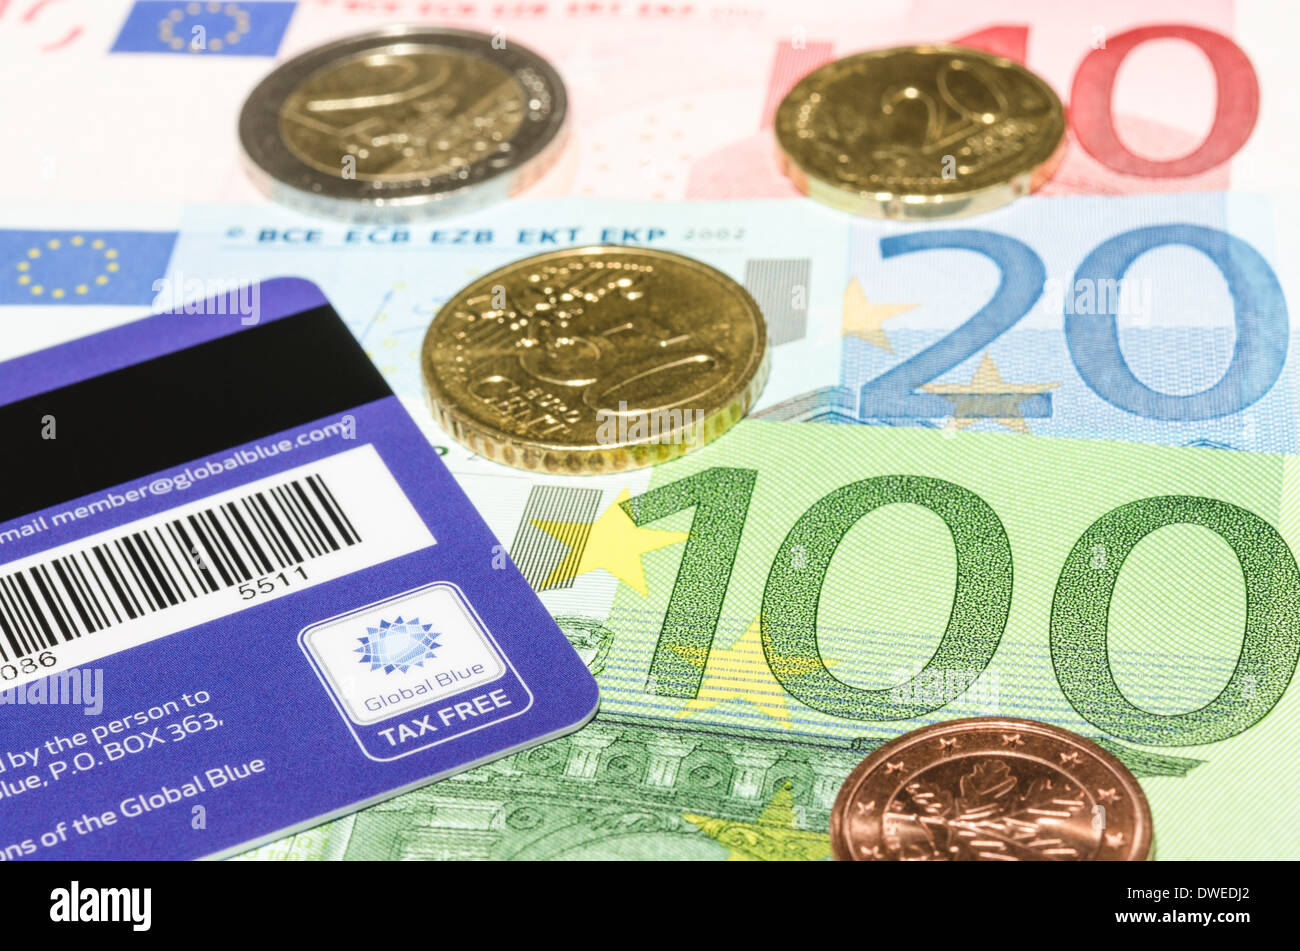 MUNICH, GERMANY - FEBRUARY 24, 2014: Barcode and logo on Global Blue card against European currency. Stock Photo